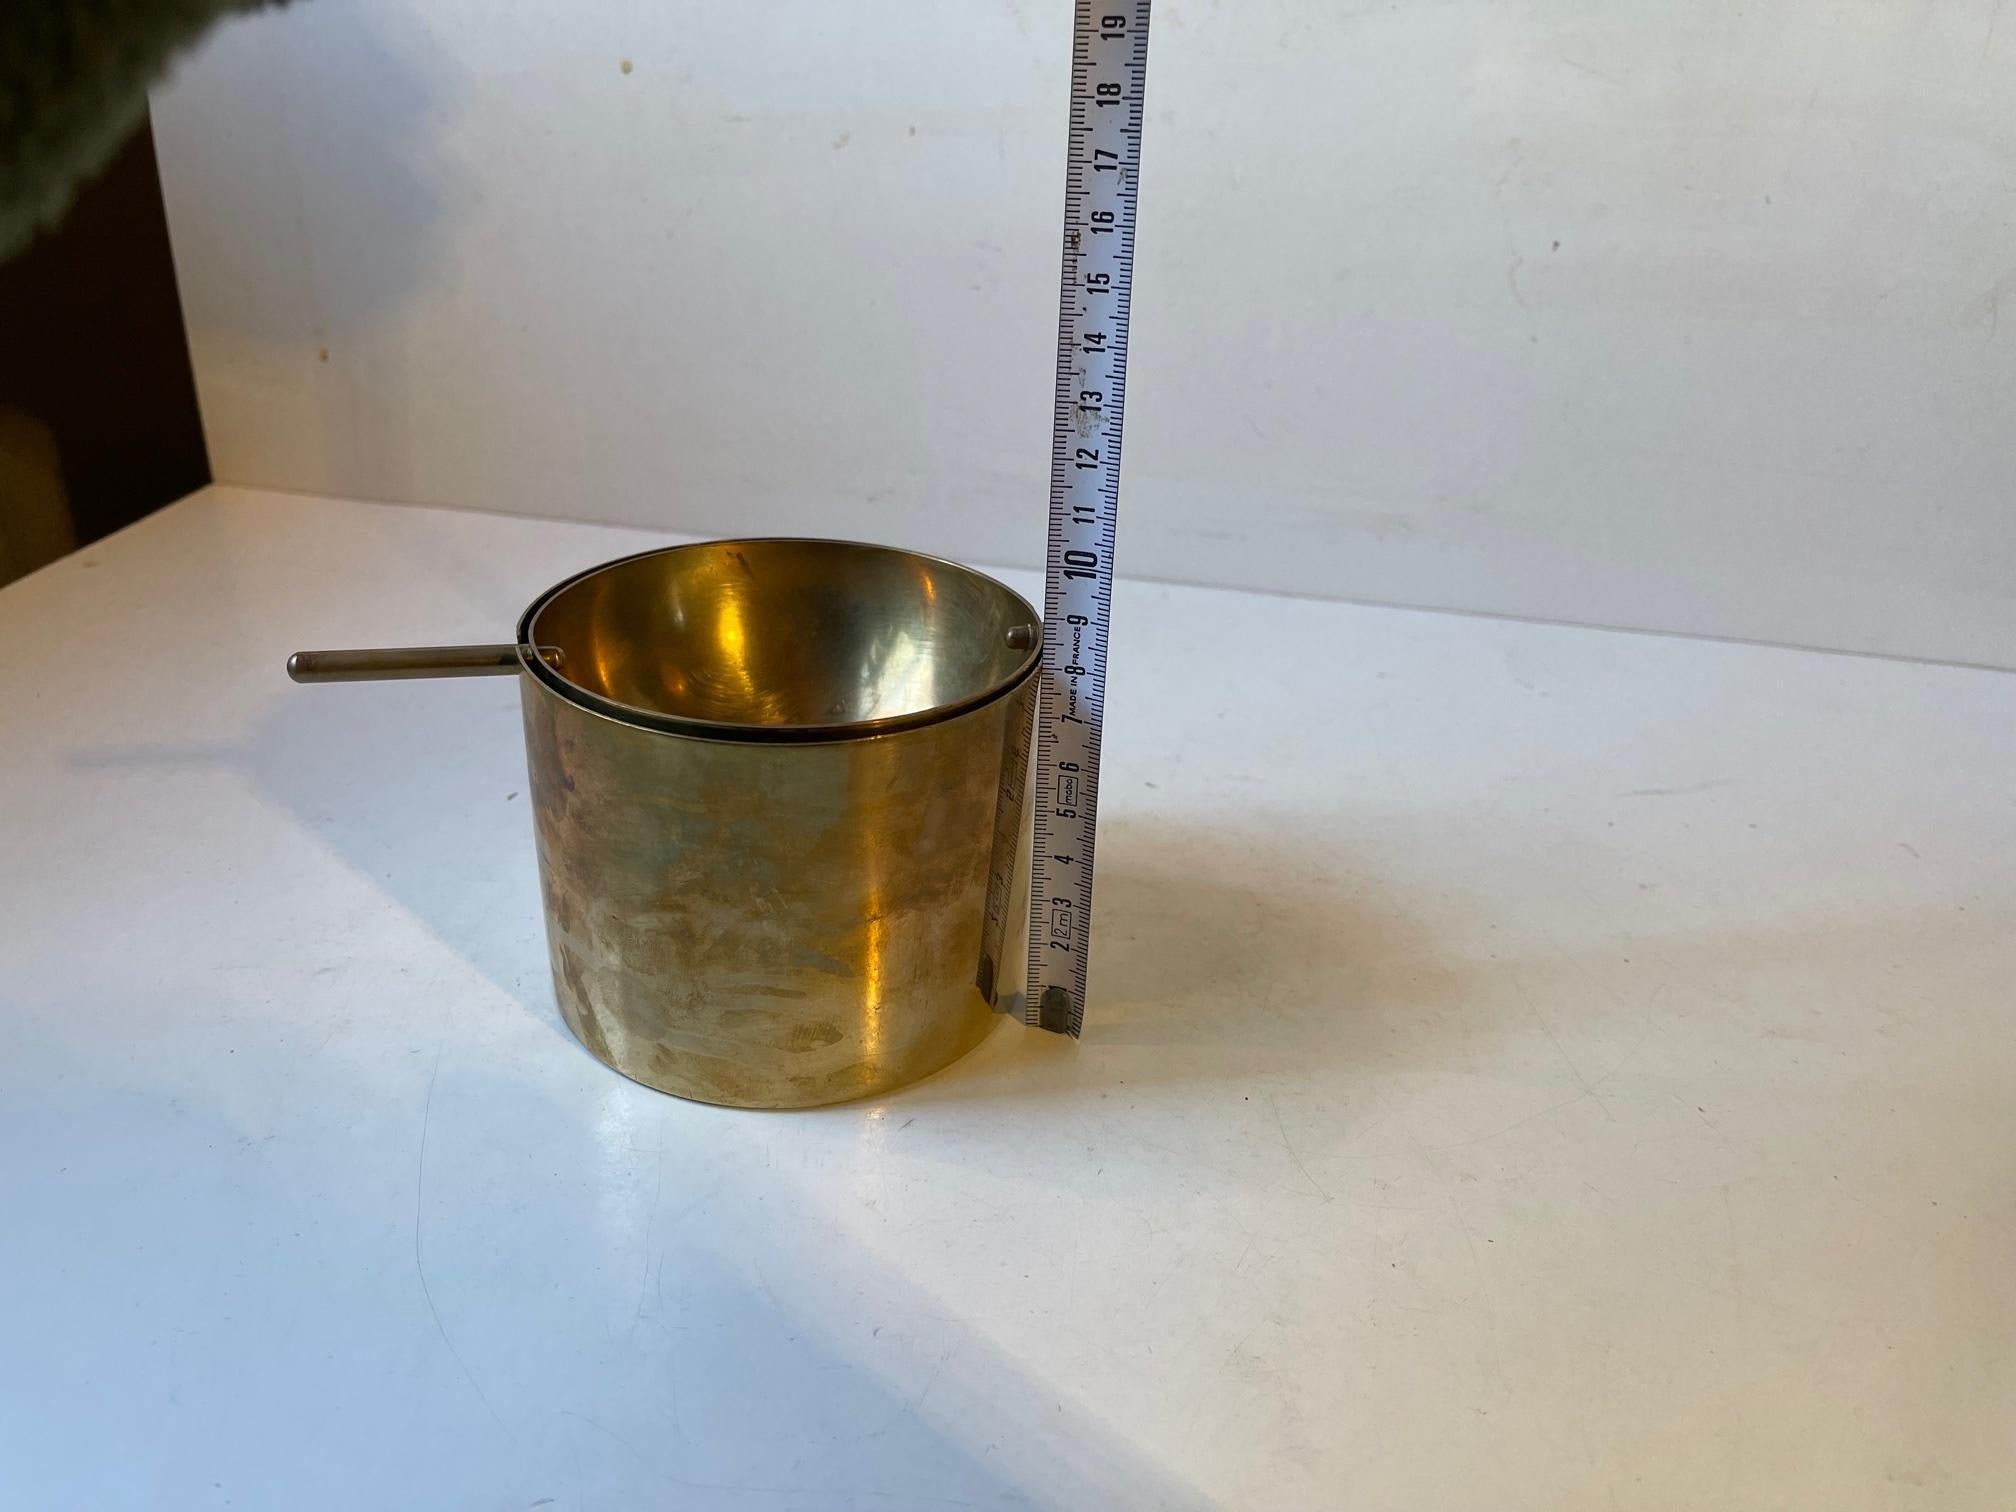 Large Brass Ashtray Cylinda-Line by Arne Jacobsen for Stelton, 1960s For Sale 3